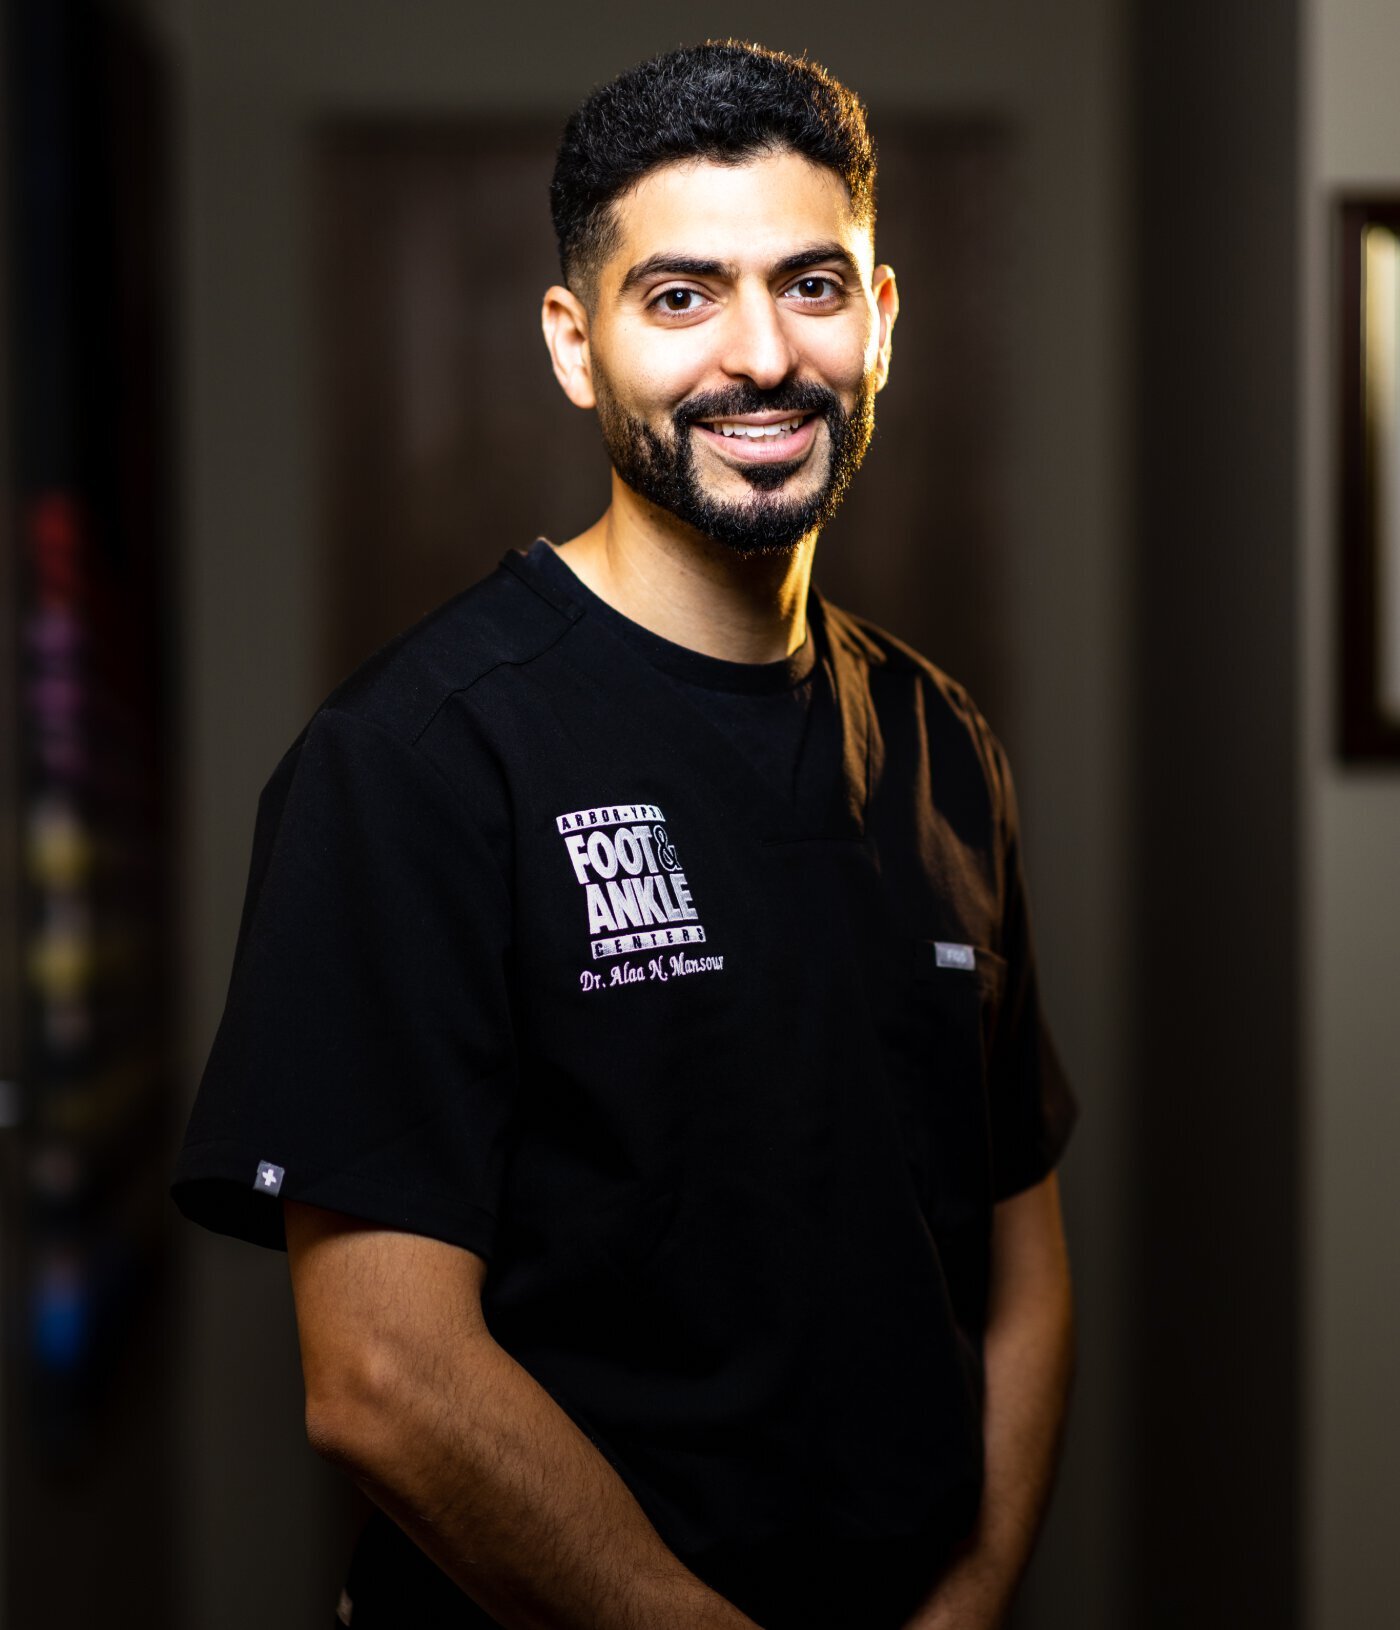 Dr. Alaa Mansour, Ann Arbor foot and ankle surgeon. Arbor - Ypsi Foot & Ankle Centers